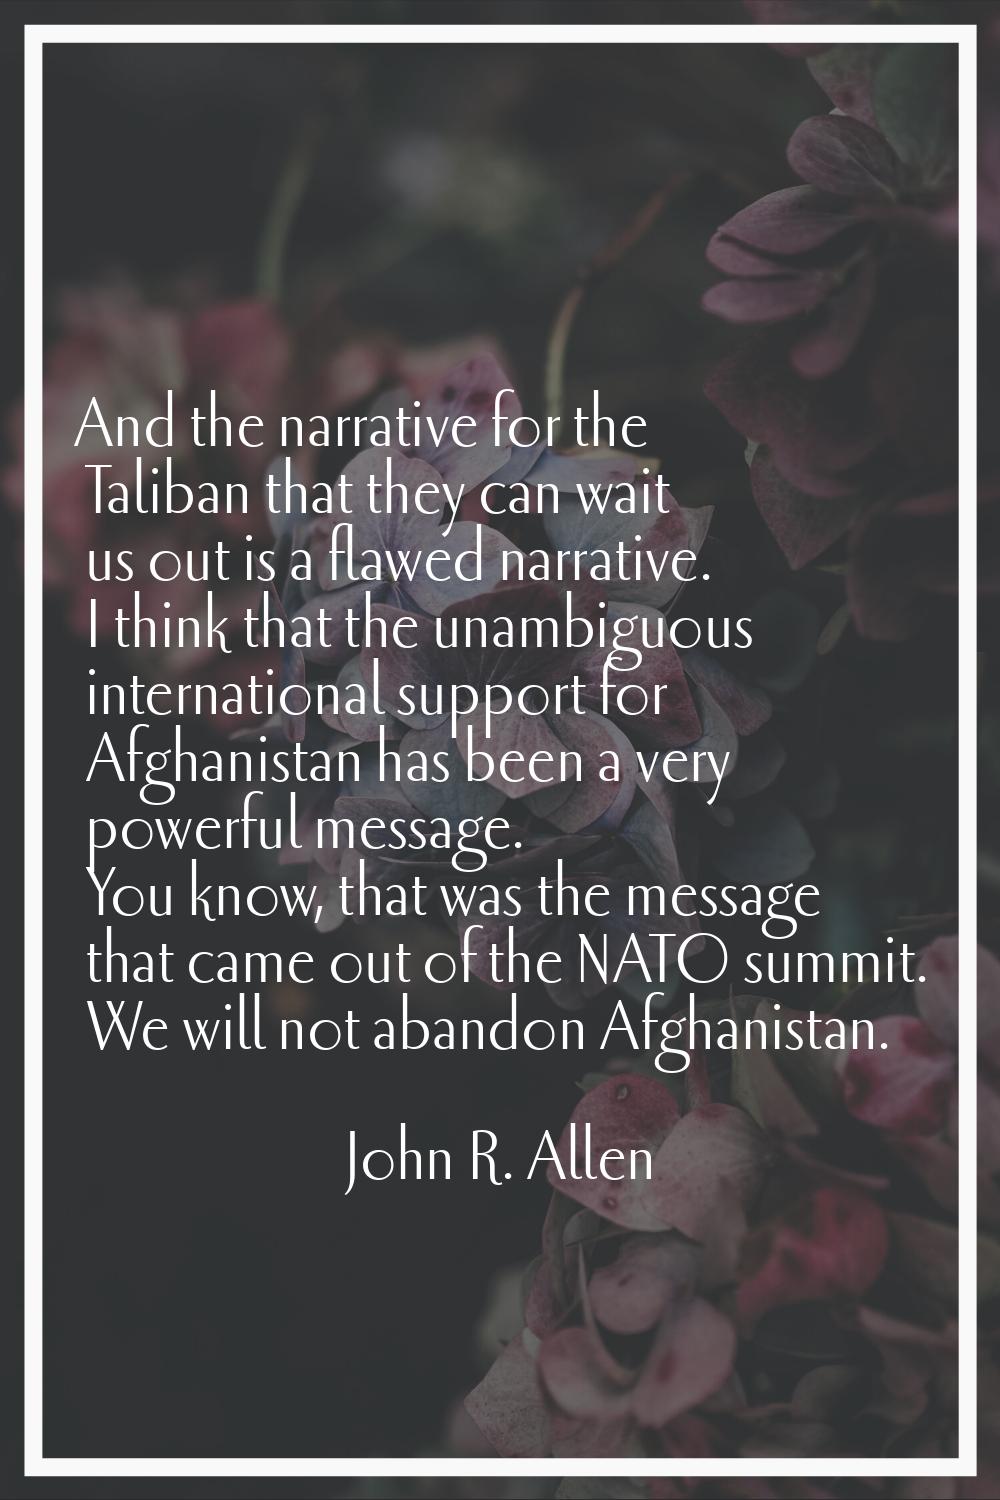 And the narrative for the Taliban that they can wait us out is a flawed narrative. I think that the